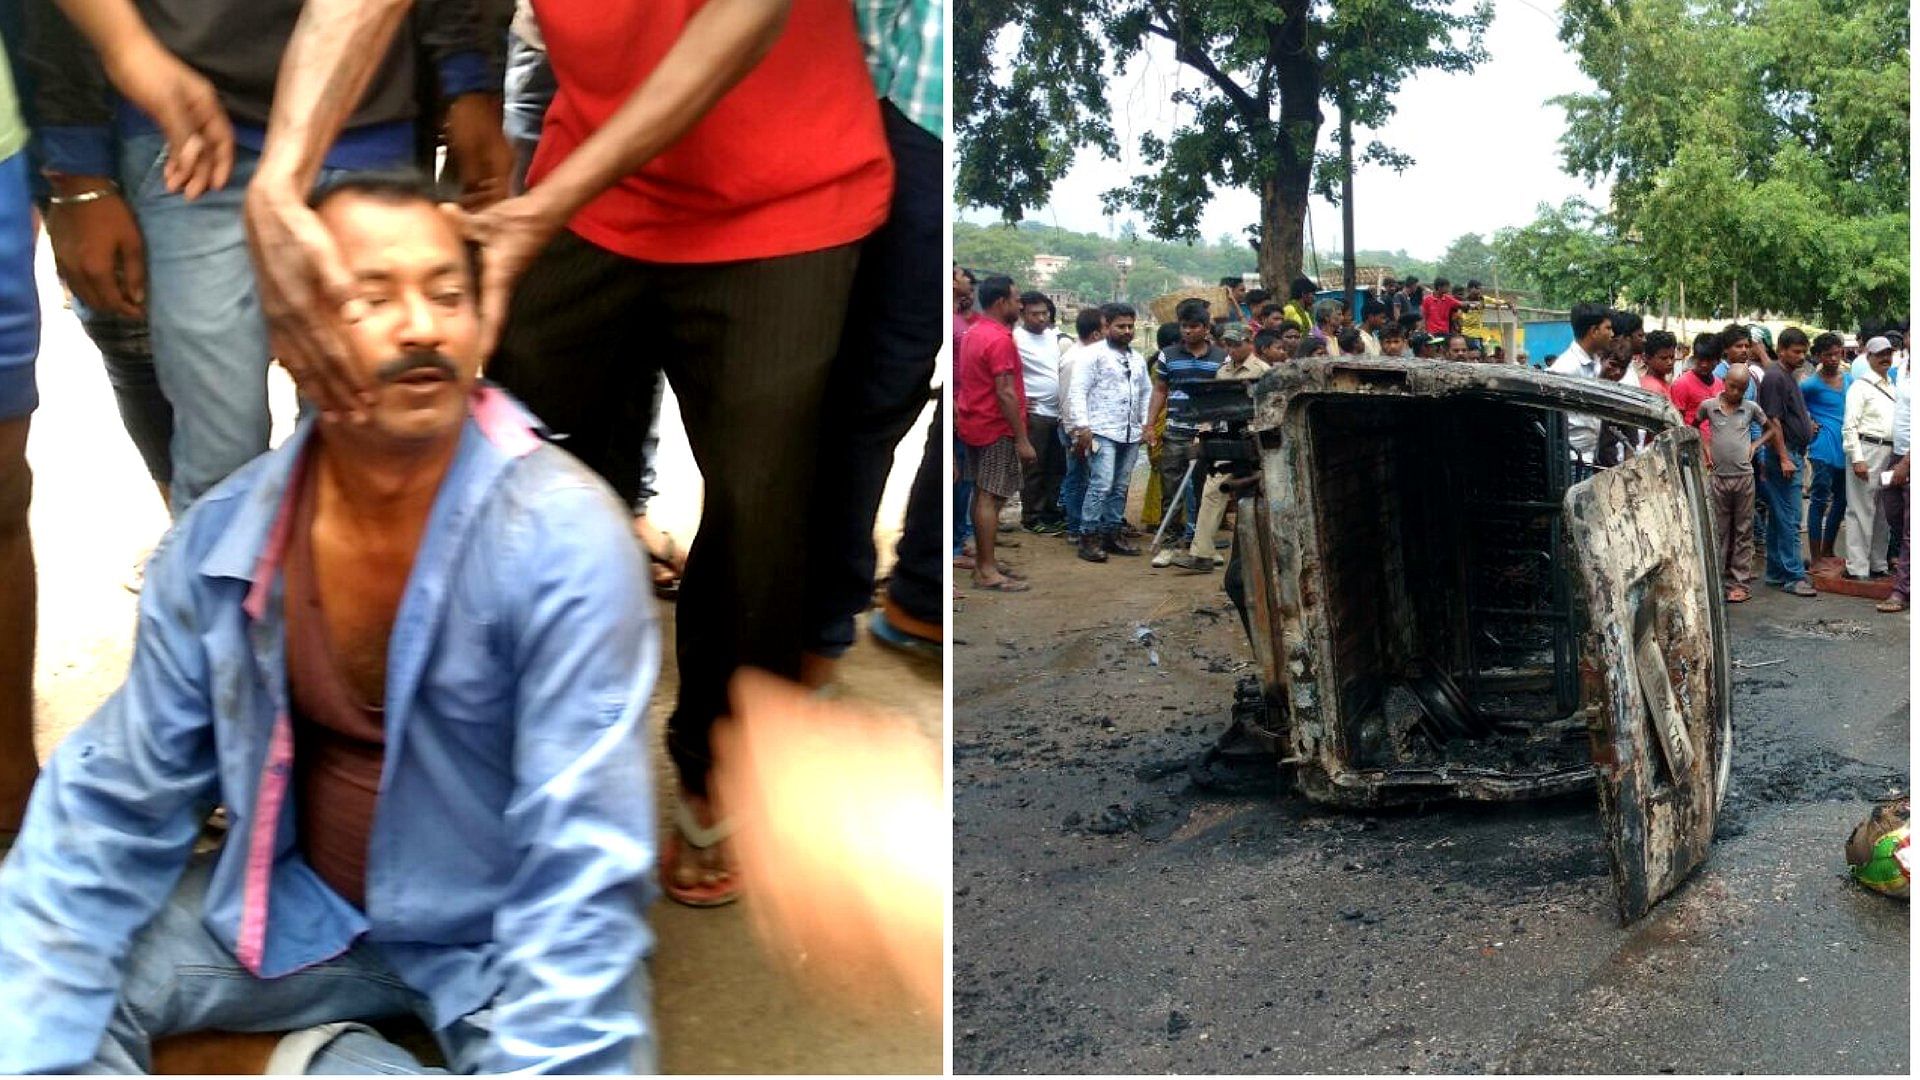 Alimuddin Ansari was made to pose for photos while he was being beaten. On the right is the Maruti van that was burnt on 29 June 2017.